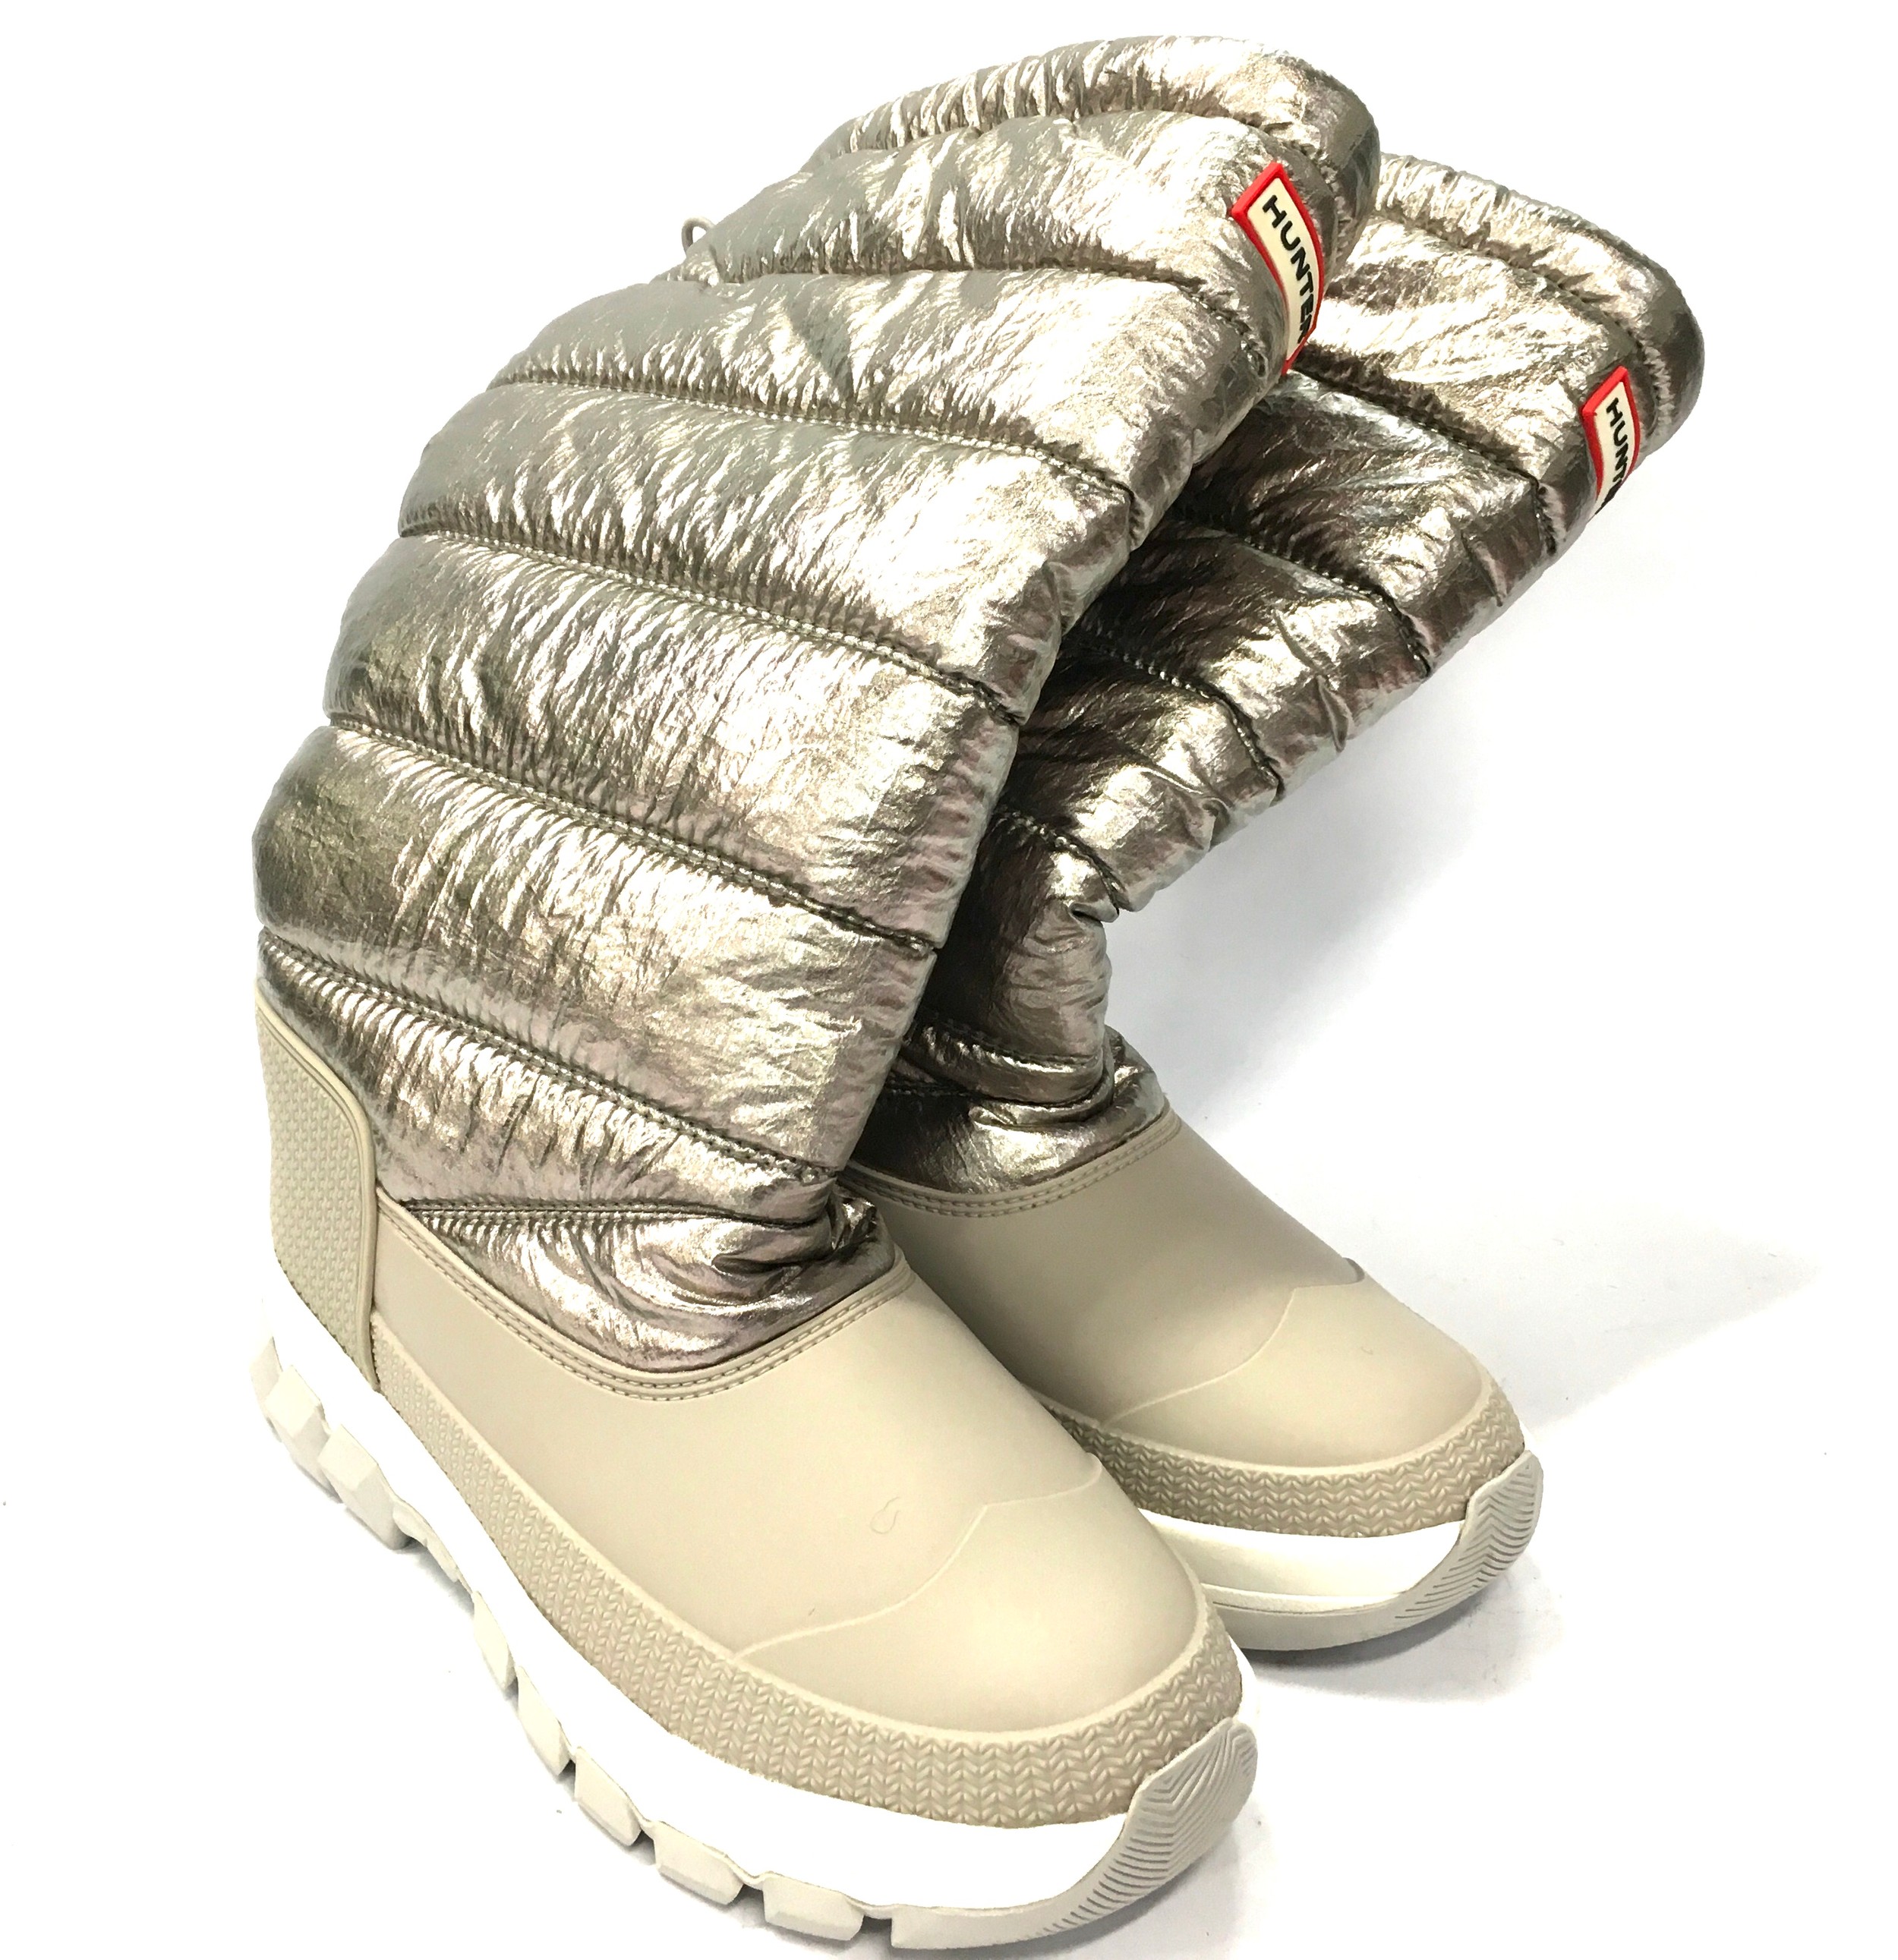 A pair of Hunter snow boots.